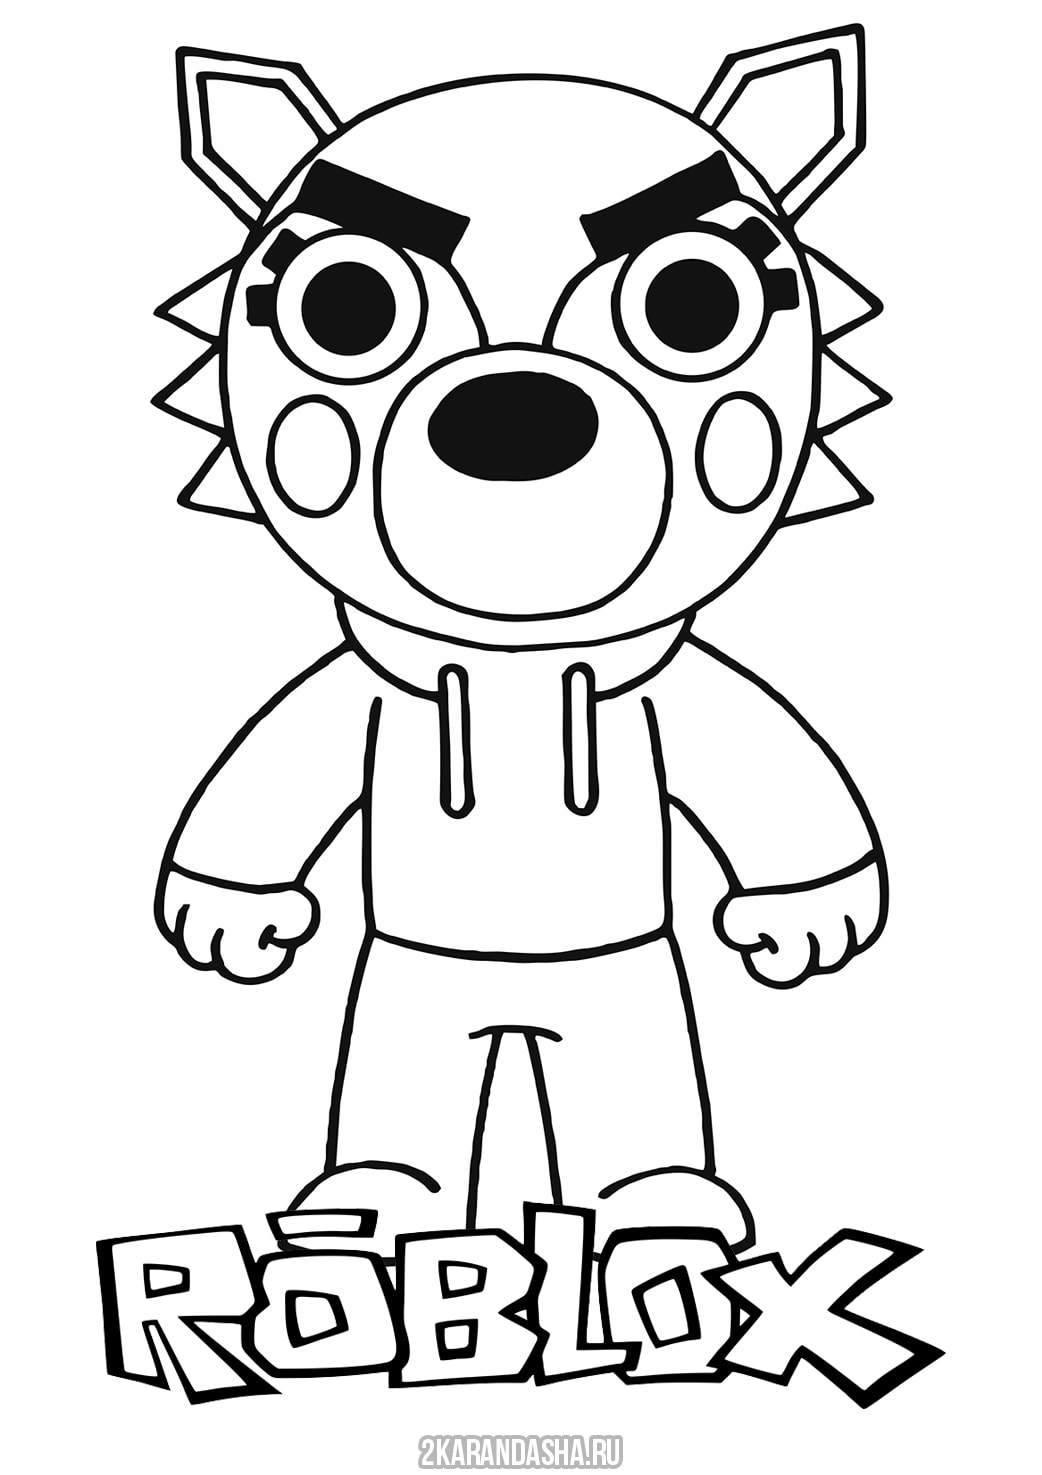 Coloring Page Roblox Piggi Willow Wolf Print Roblox - roblox piggy bunny coloring pages